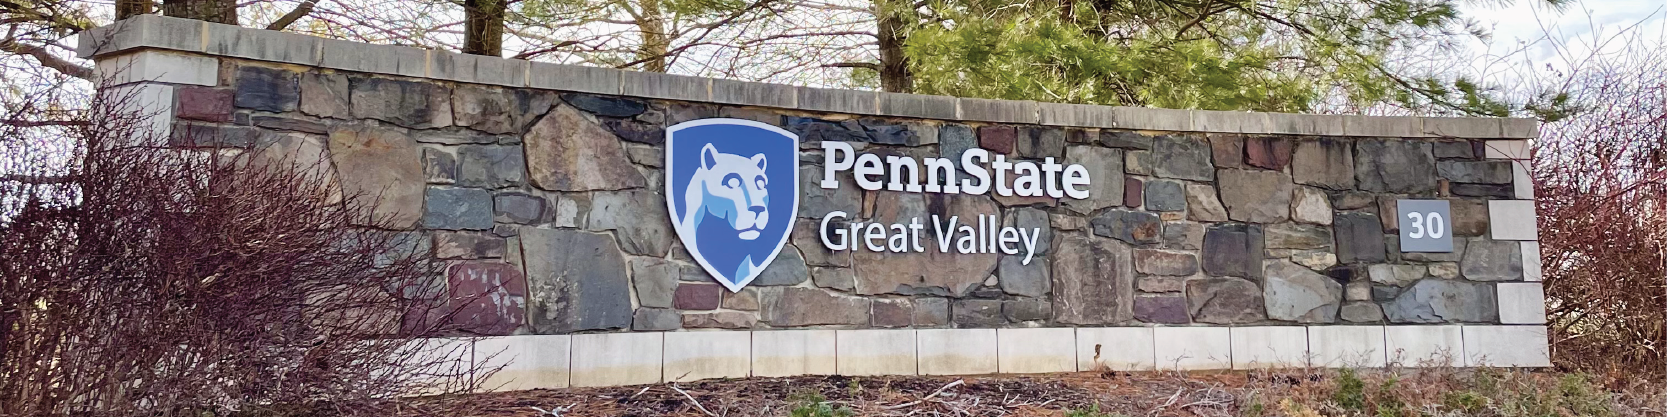 Photo of Penn State logo on a stone wall